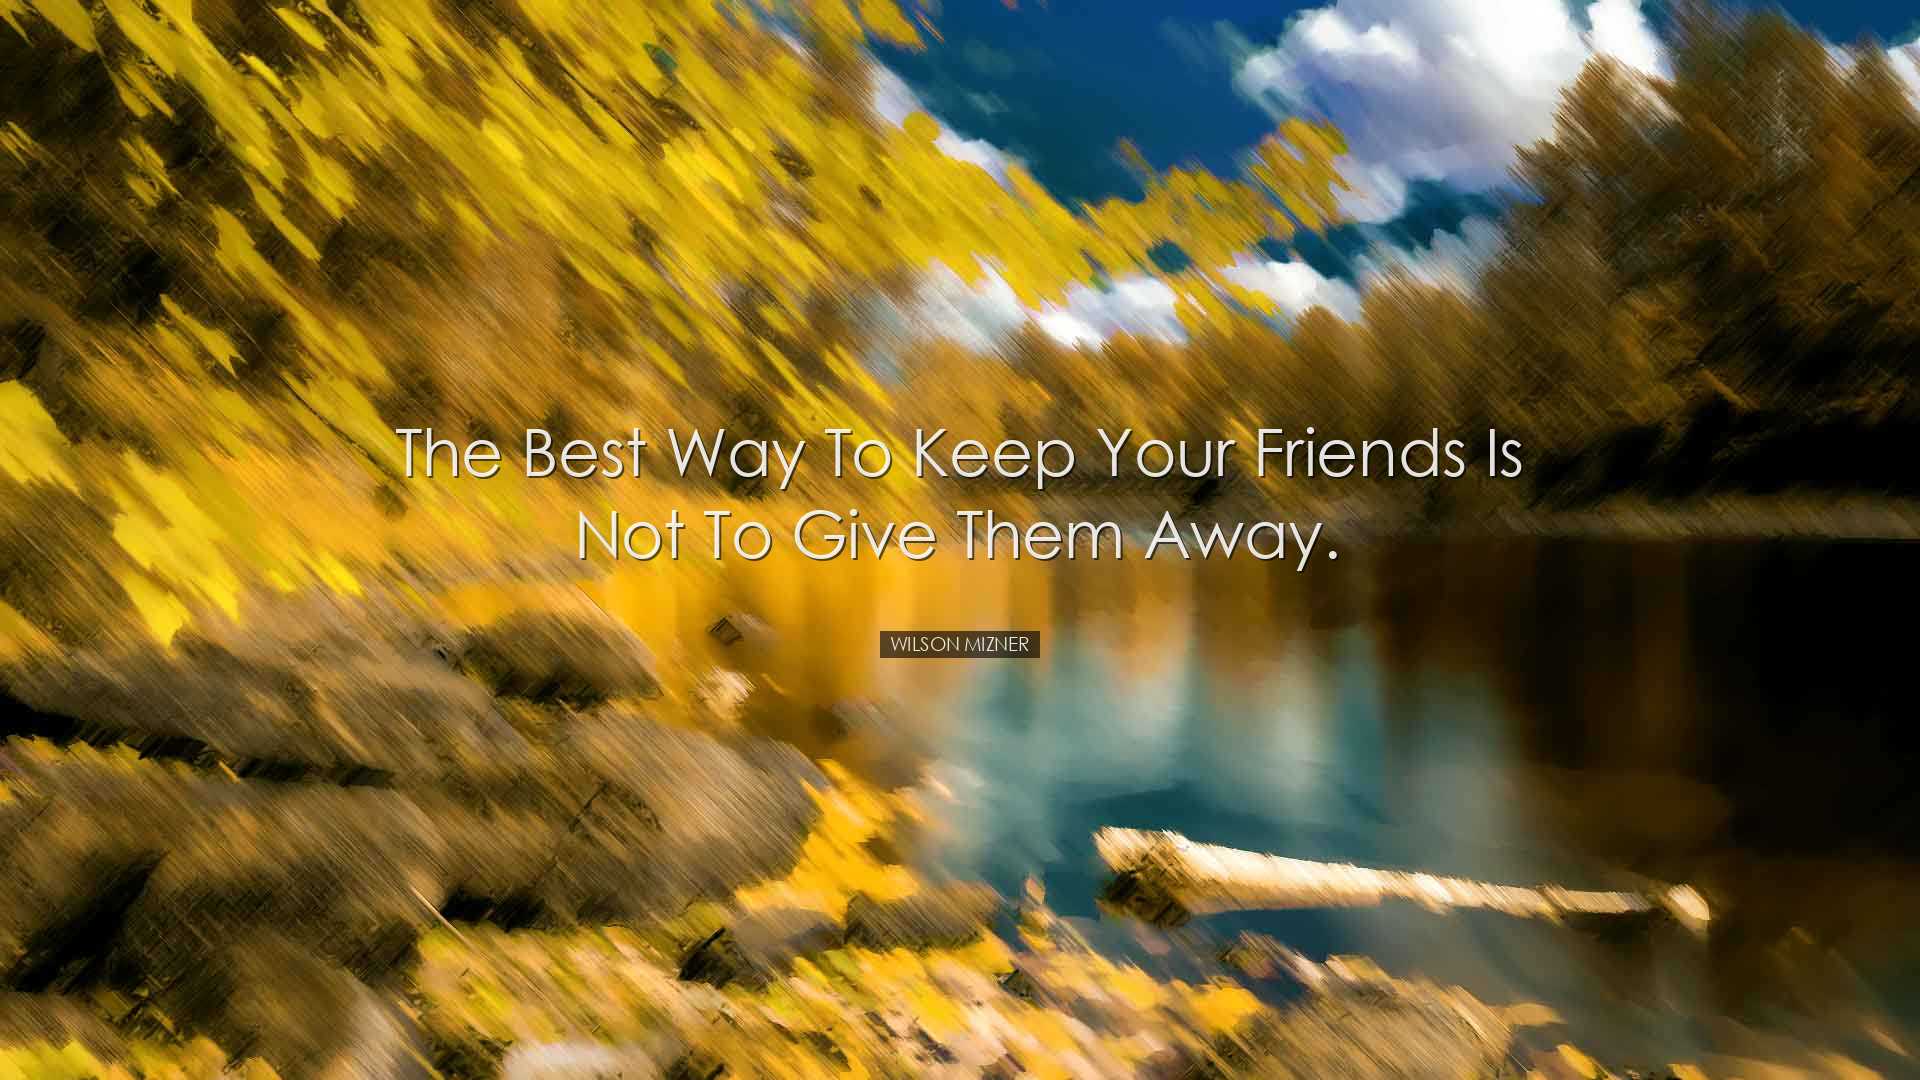 The best way to keep your friends is not to give them away. - Wils